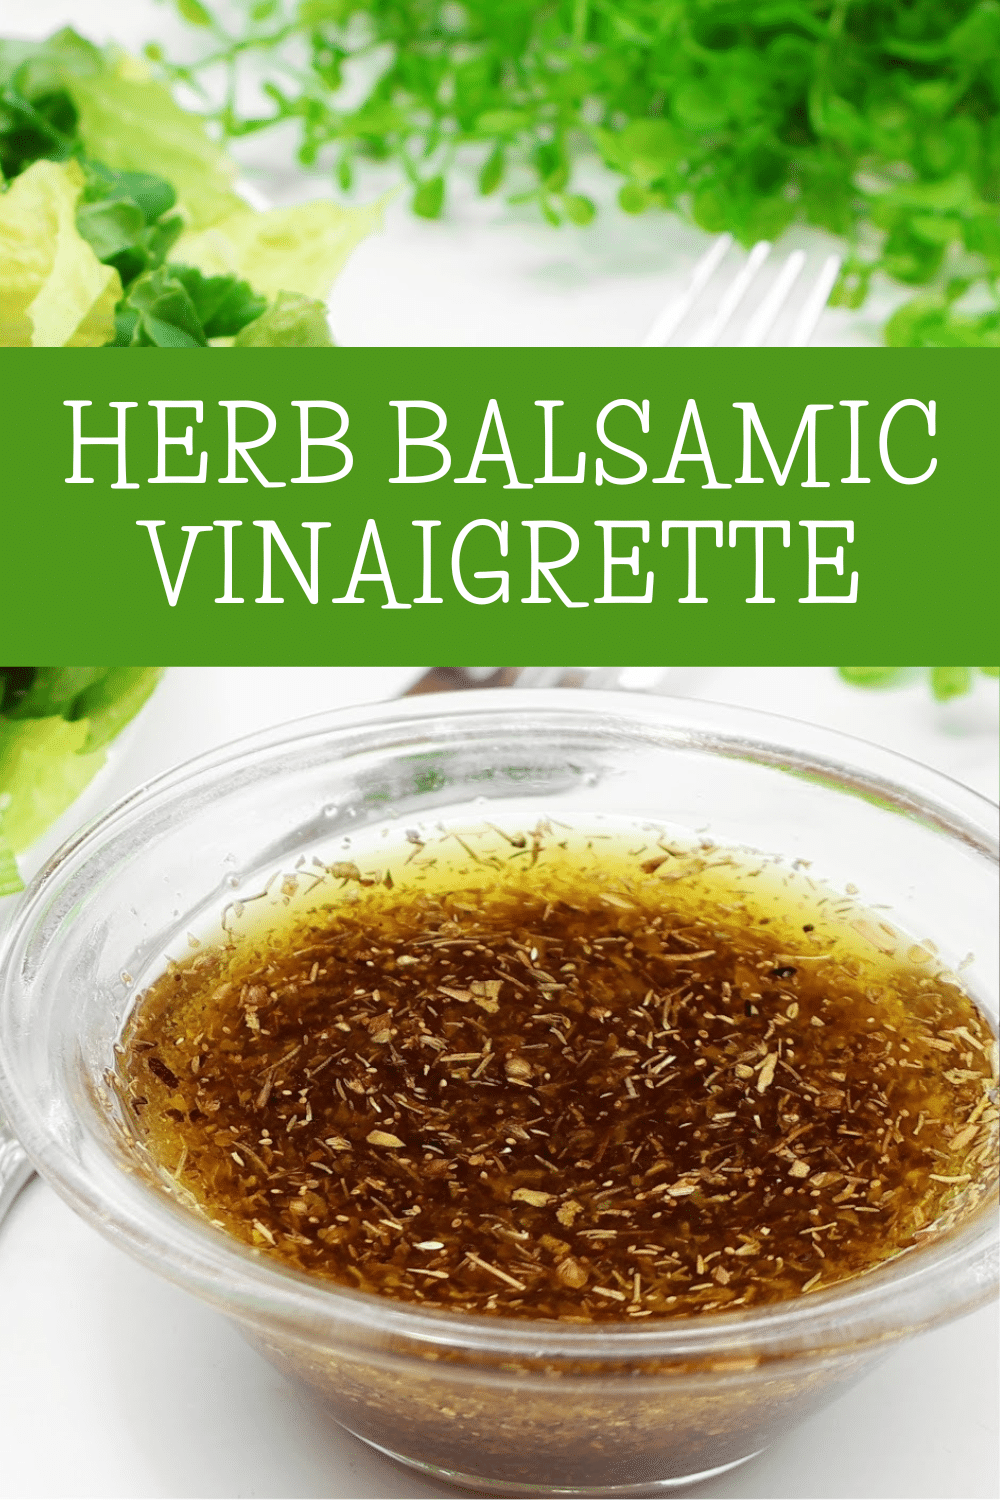 Herb Balsamic Vinaigrette ~ A versatile dressing perfect for drizzling over simple green salads or grilled summer vegetables. via @thiswifecooks